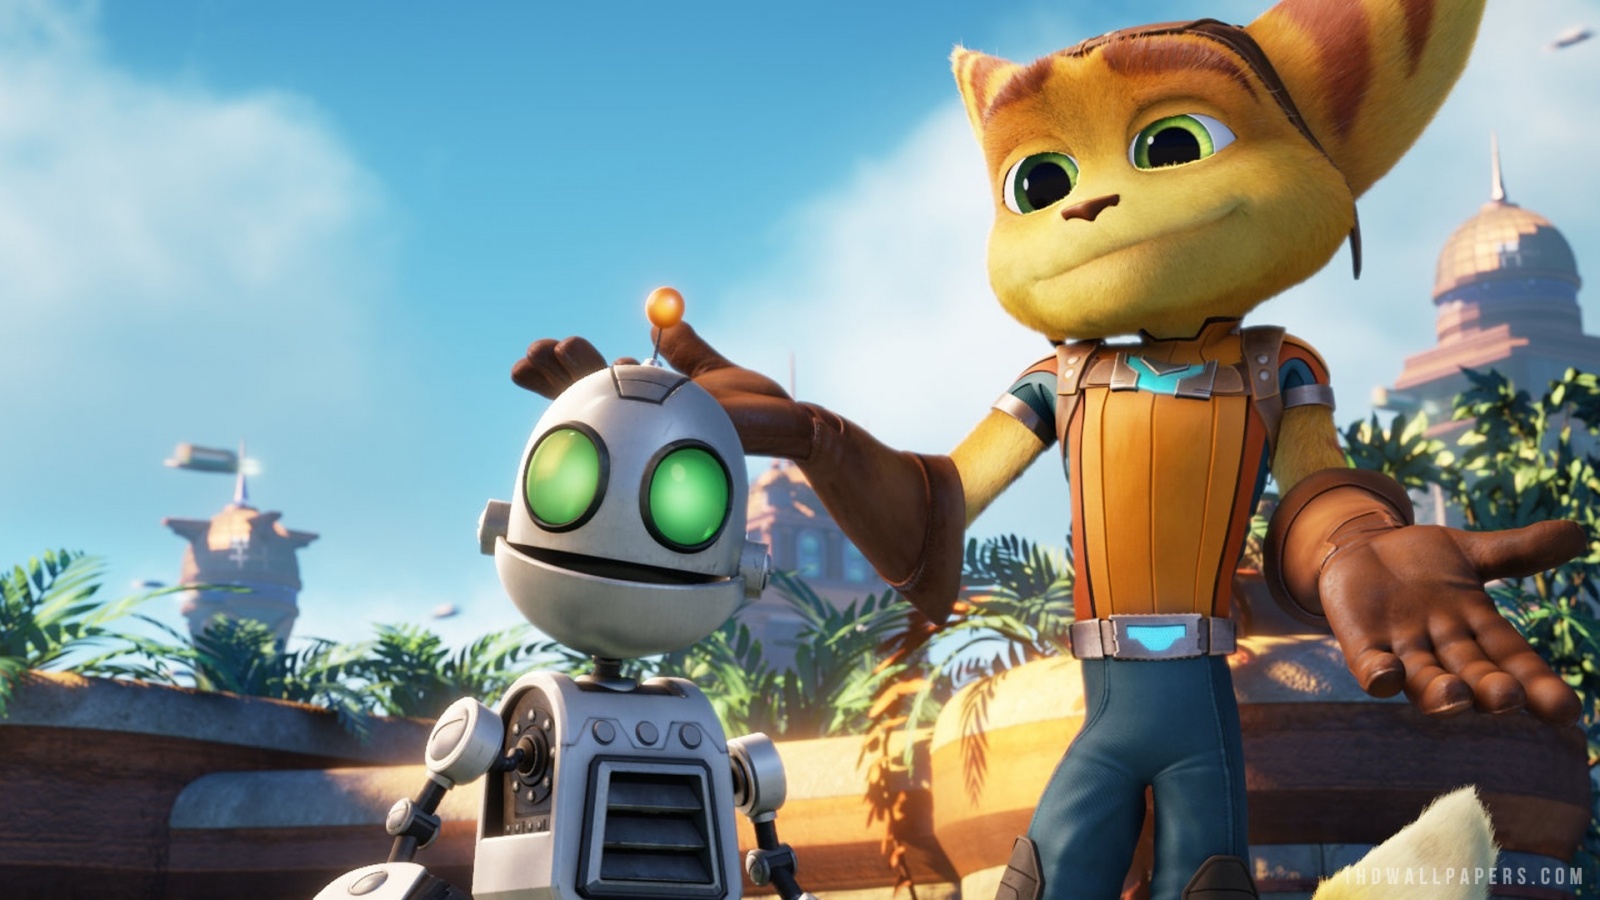 Ratchet Clank 2015 Movie HD Wallpaper   iHD Wallpapers